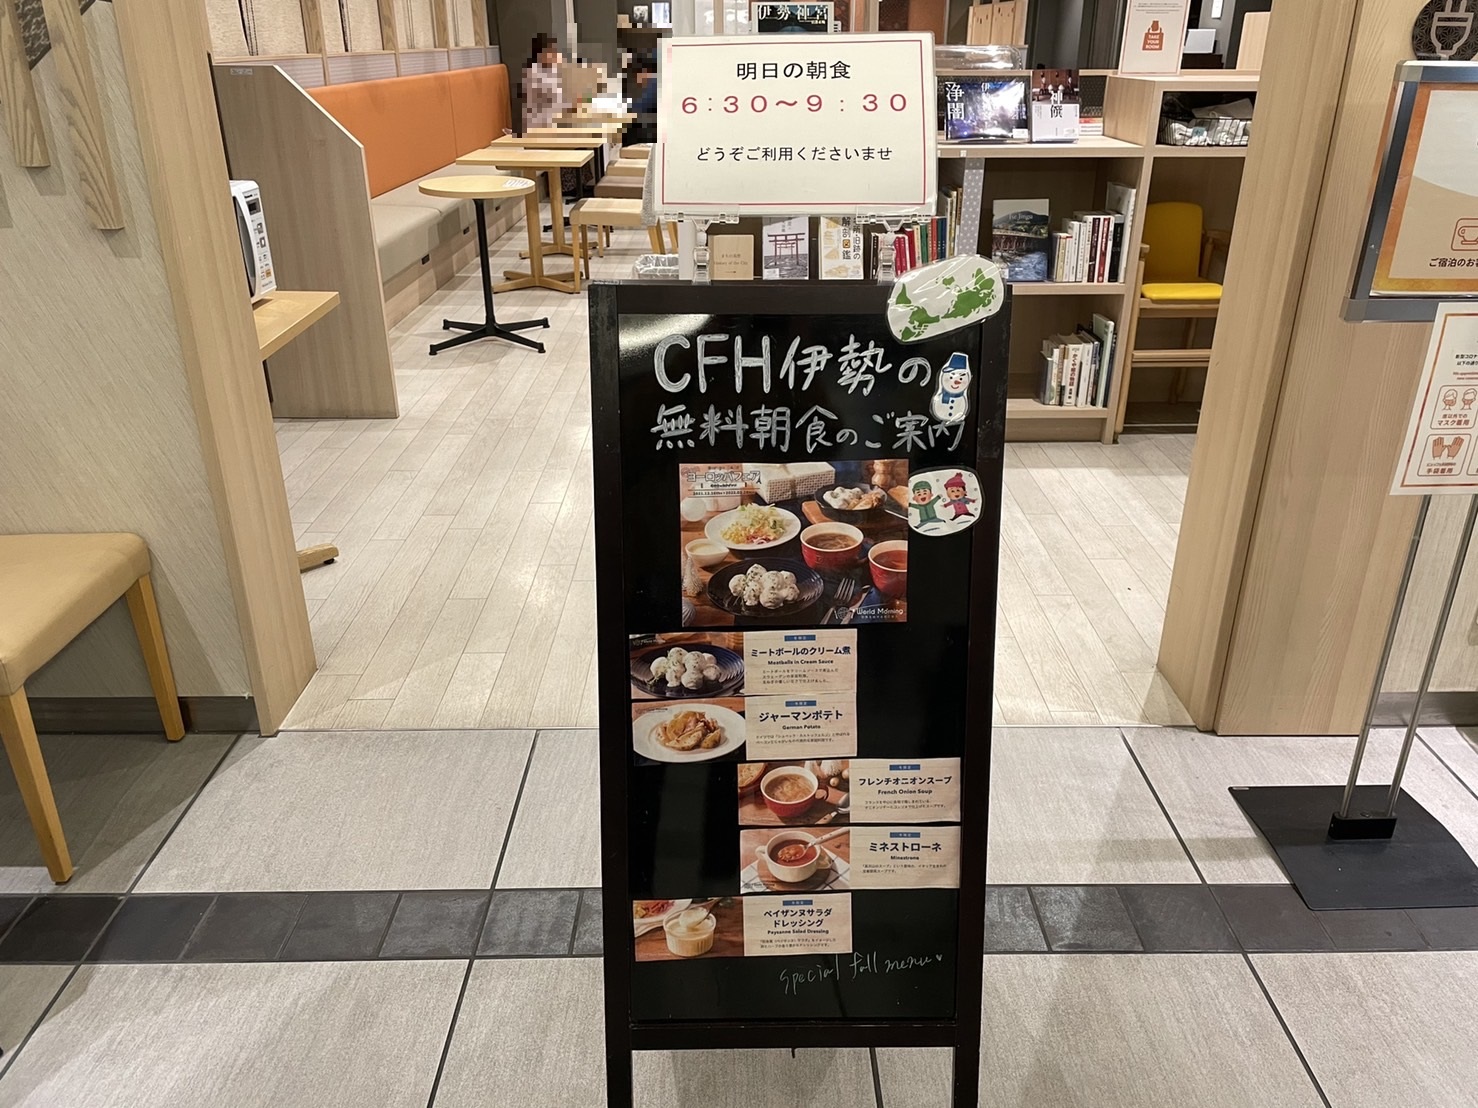 Comfort Library Cafeの朝食メニュー